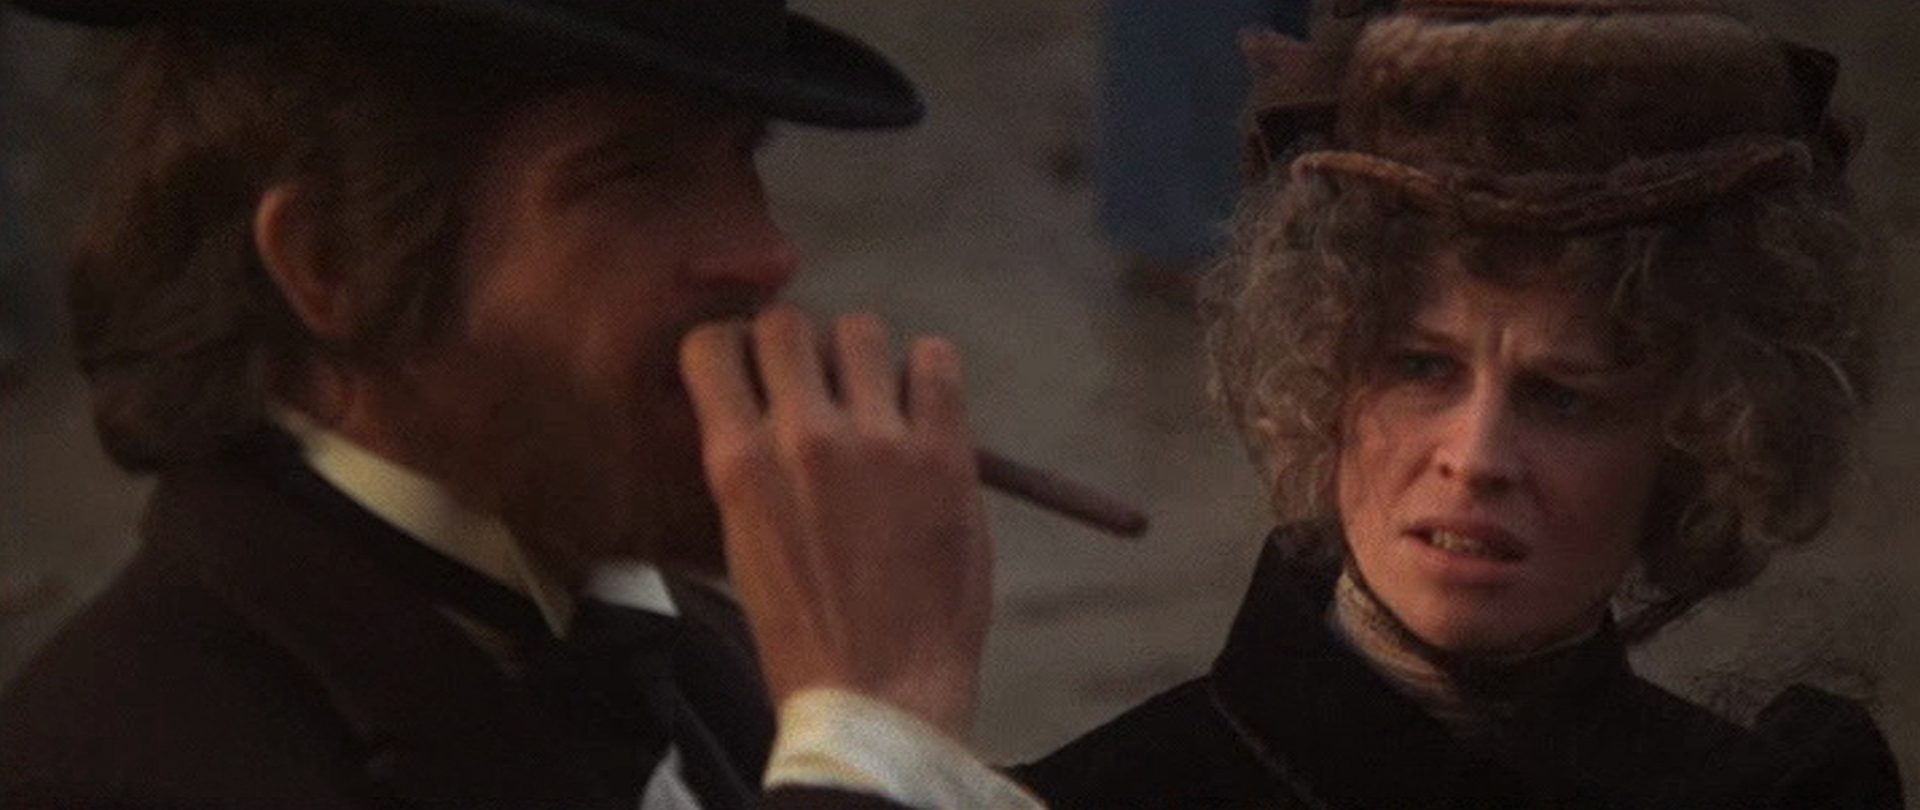 Close-up of Warren Beatty as John McCabe with long cigar and Julie Christie as Constance Miller looking at him critically.